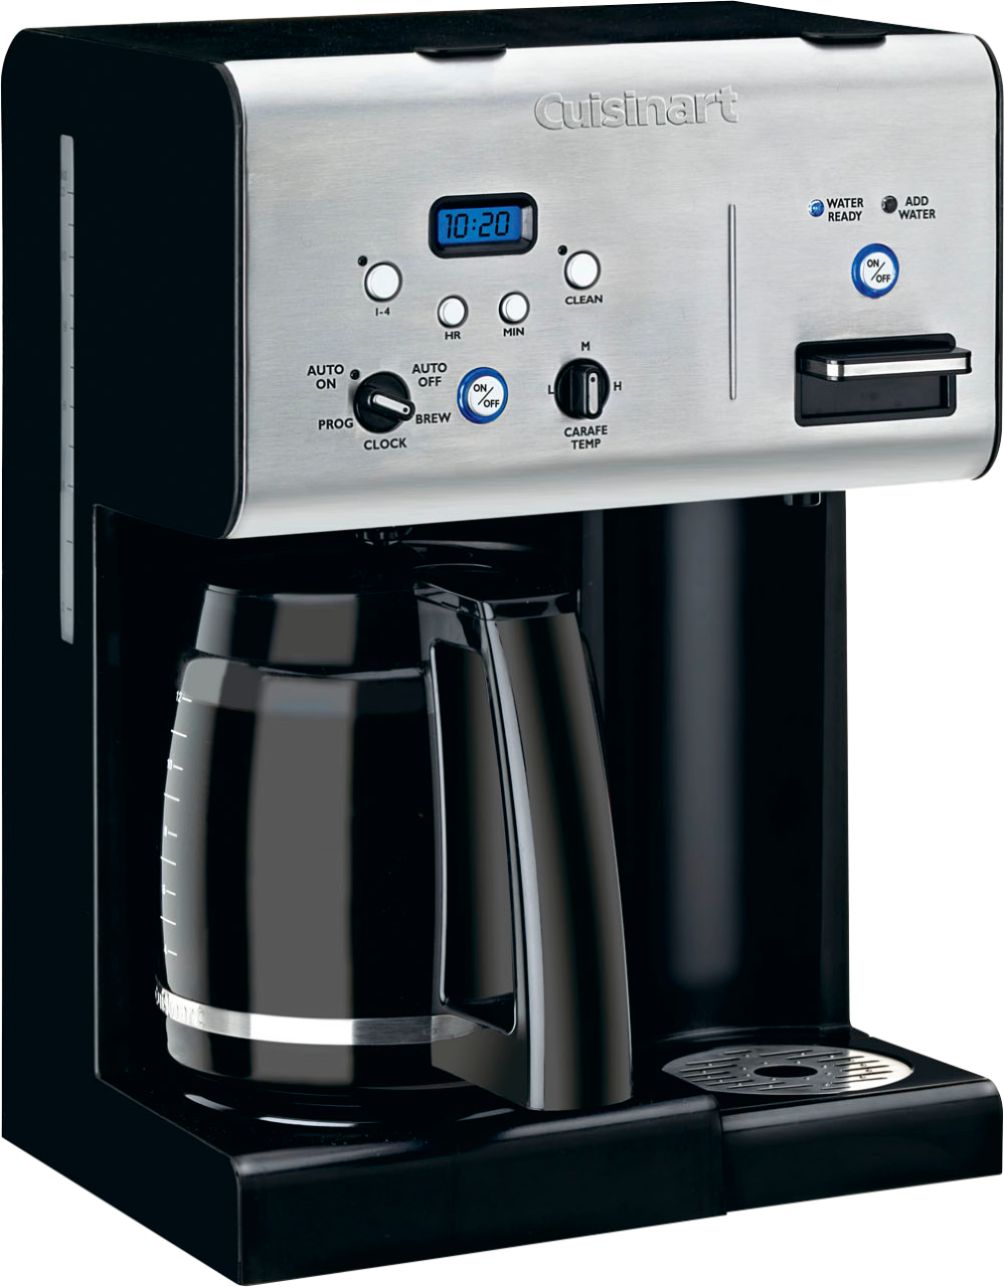 Angle View: Cuisinart - 12-Cup Coffee Maker with Hot Water System - Black/Stainless Steel